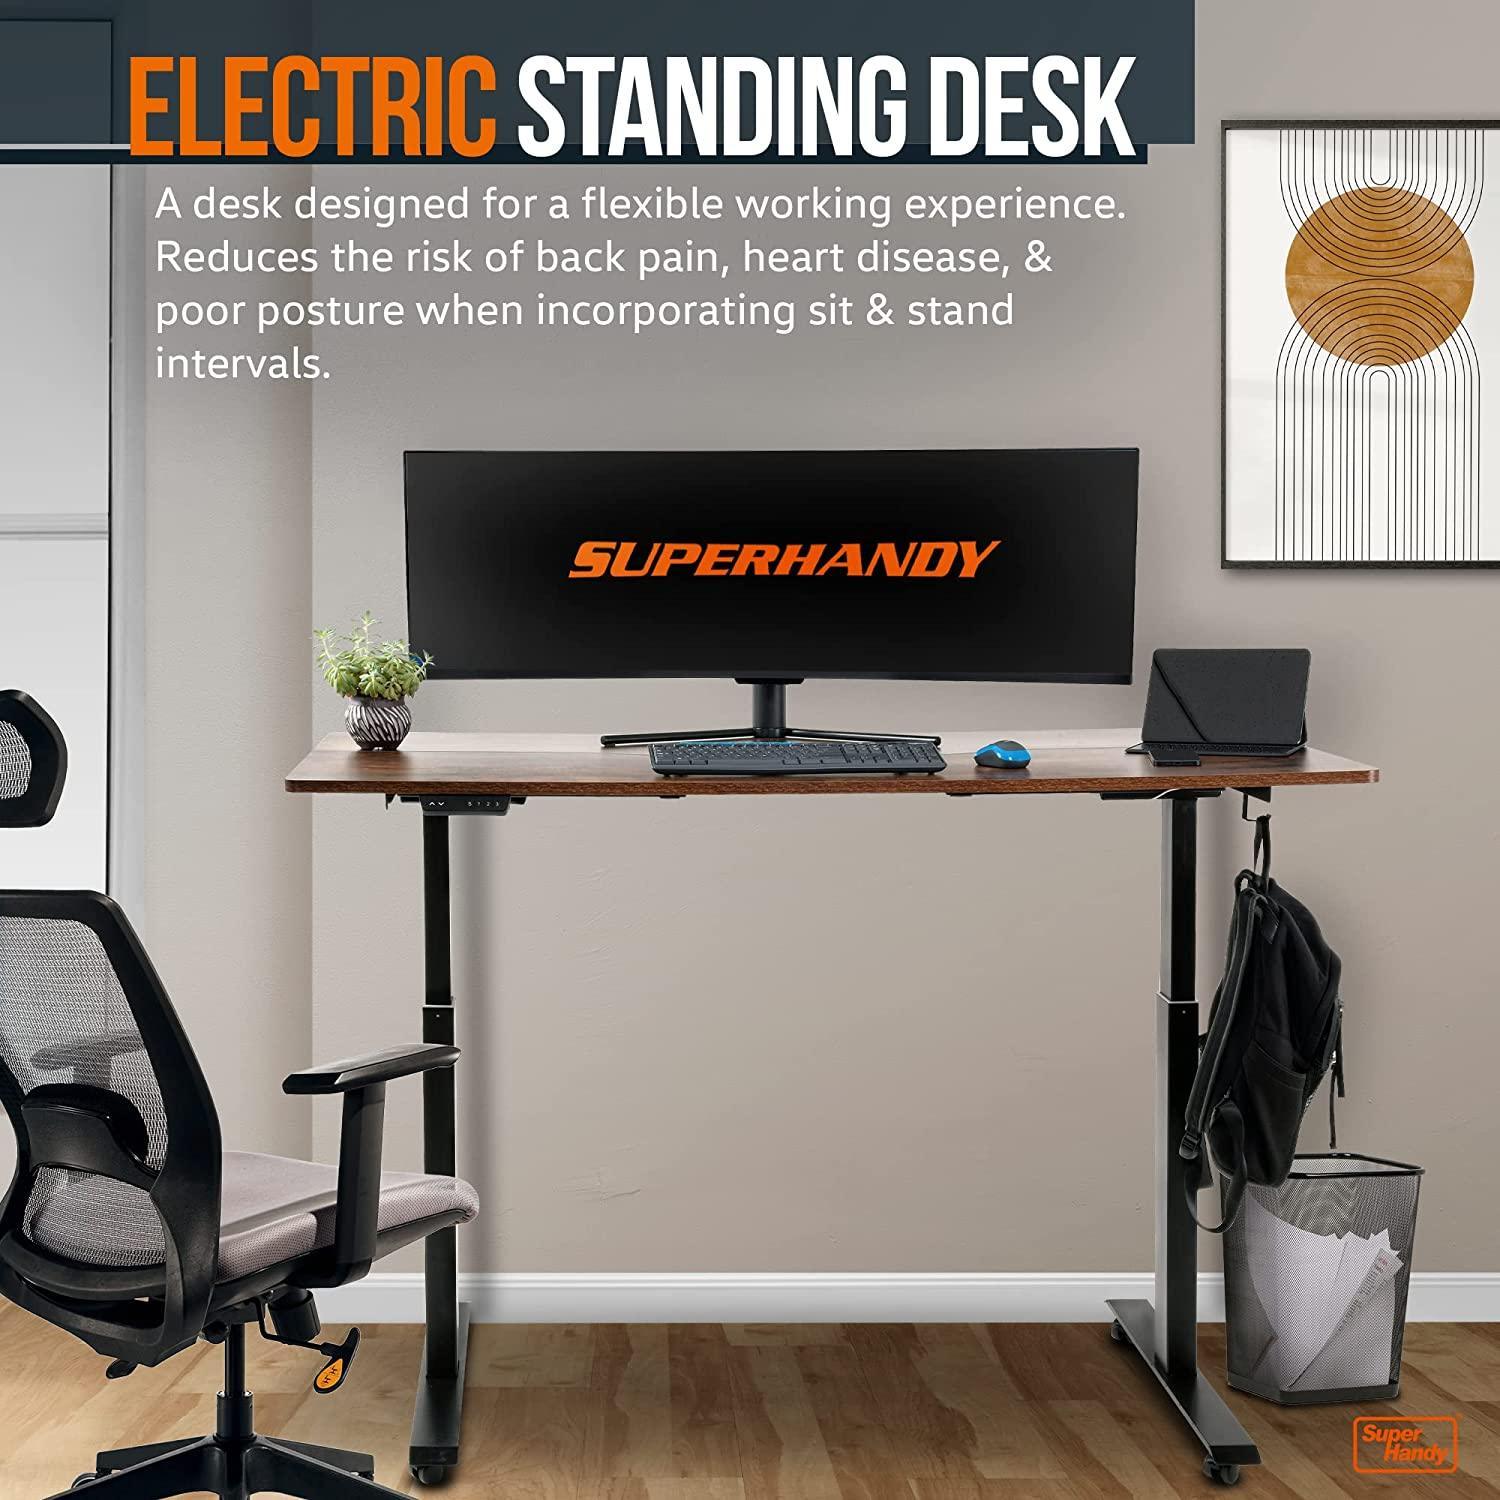 SuperHandy Adjustable Standing Desk - 60" x 30" Table-Top, Programmable Memory Presets, Wireless Charging Pad - DIY Tools by GreatCircleUS